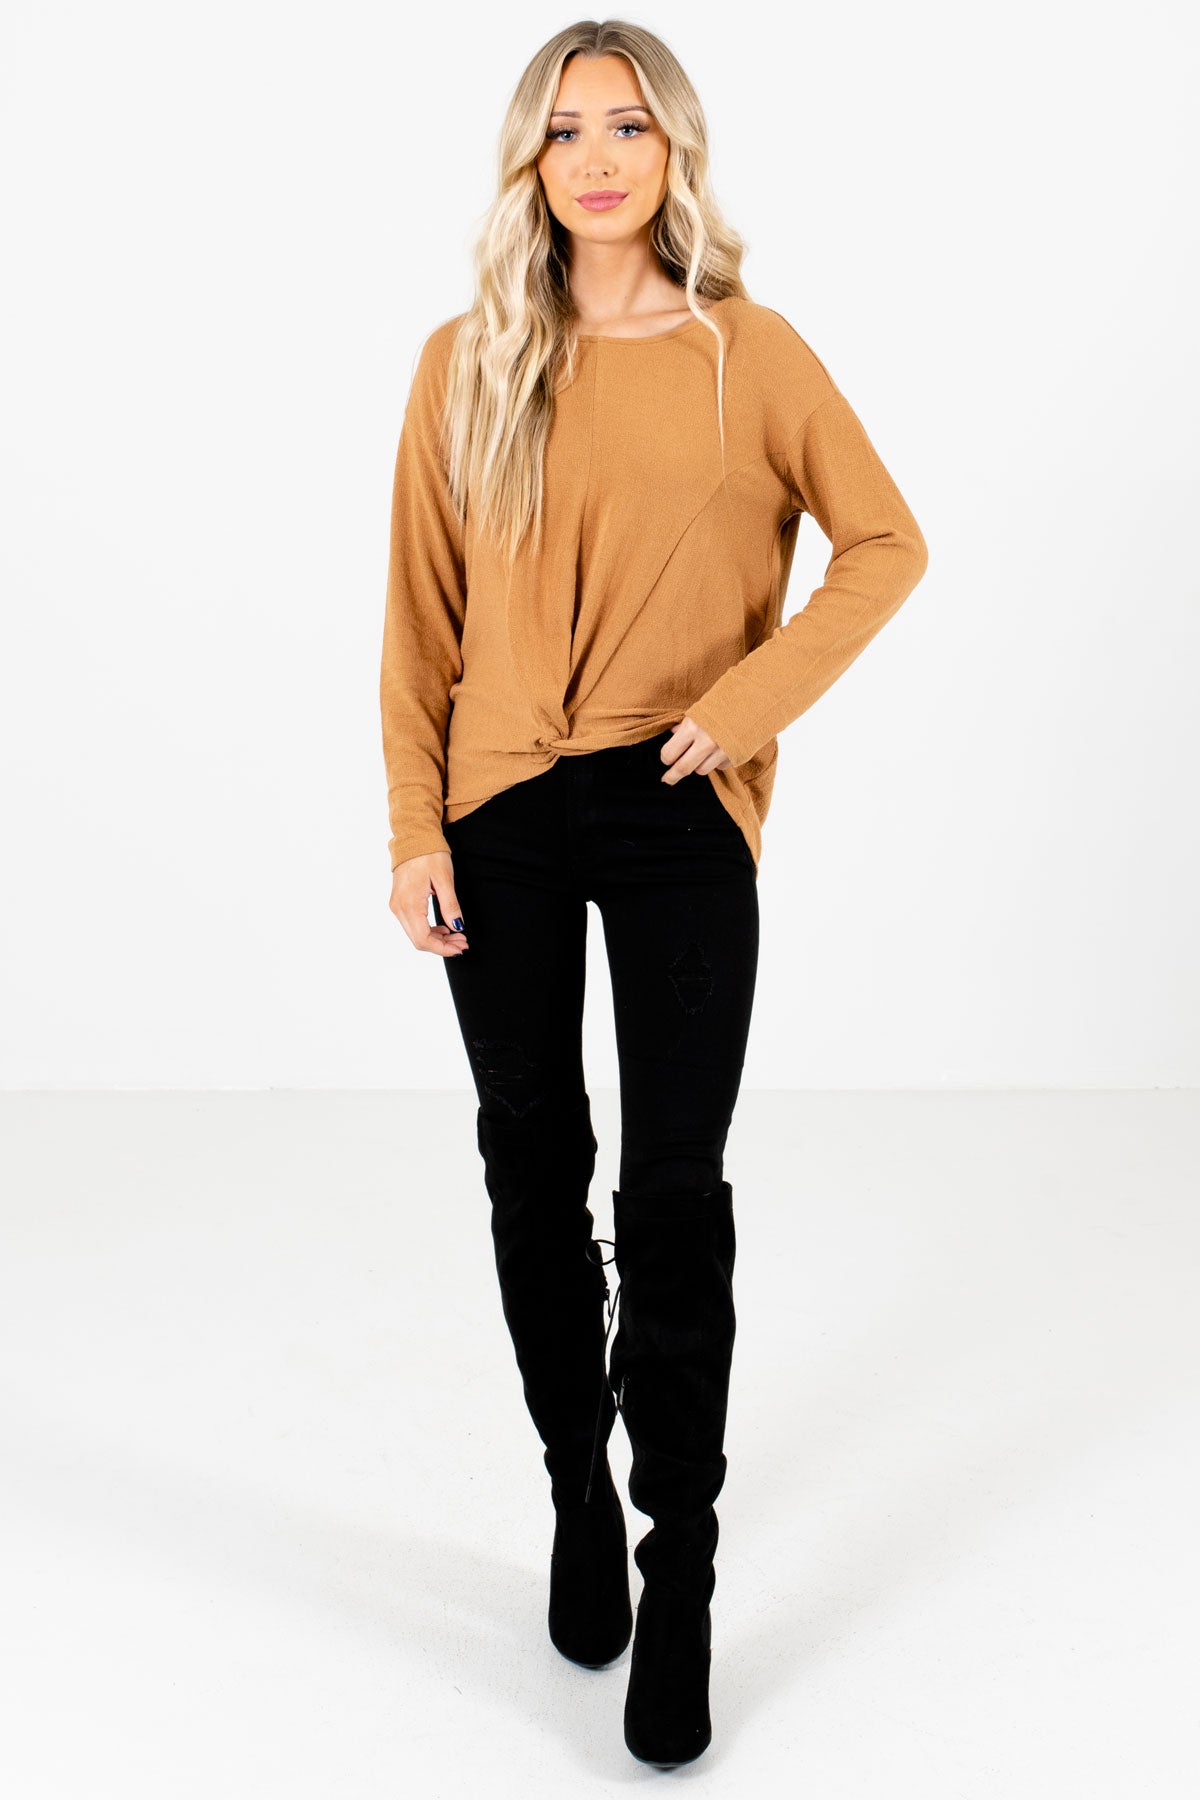 Mustard Cute and Comfortable Boutique Tops for Women